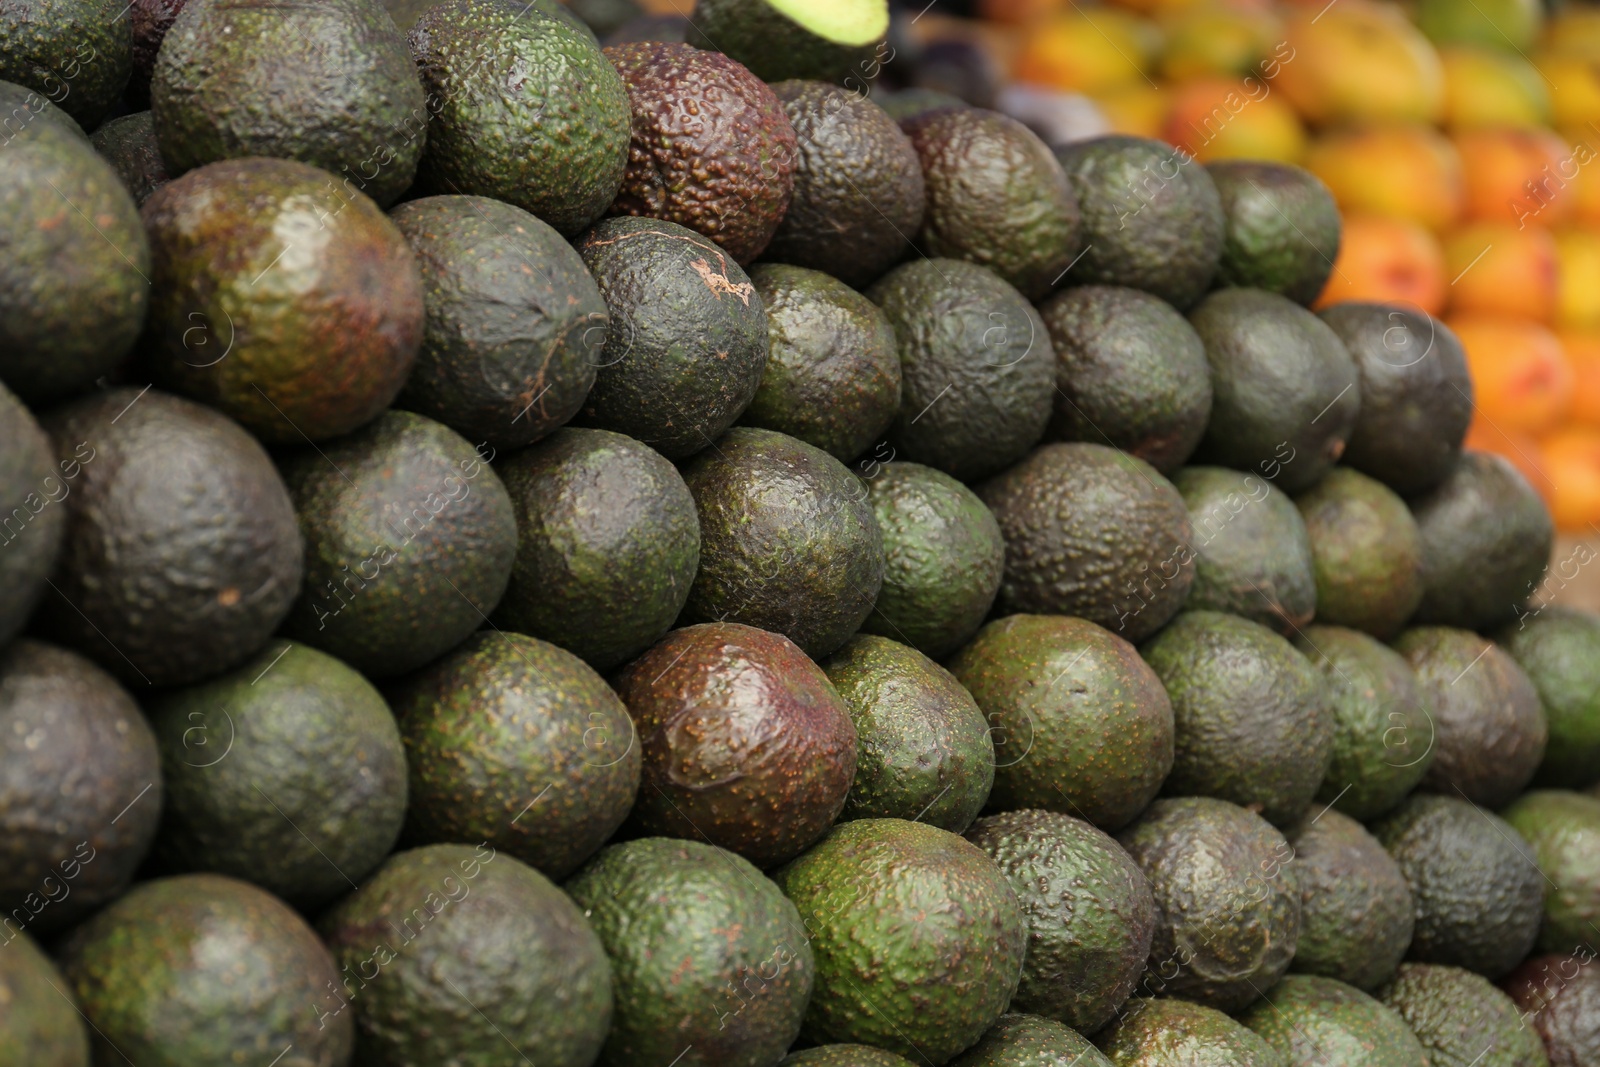 Photo of Pile of delicious fresh ripe avocados at market